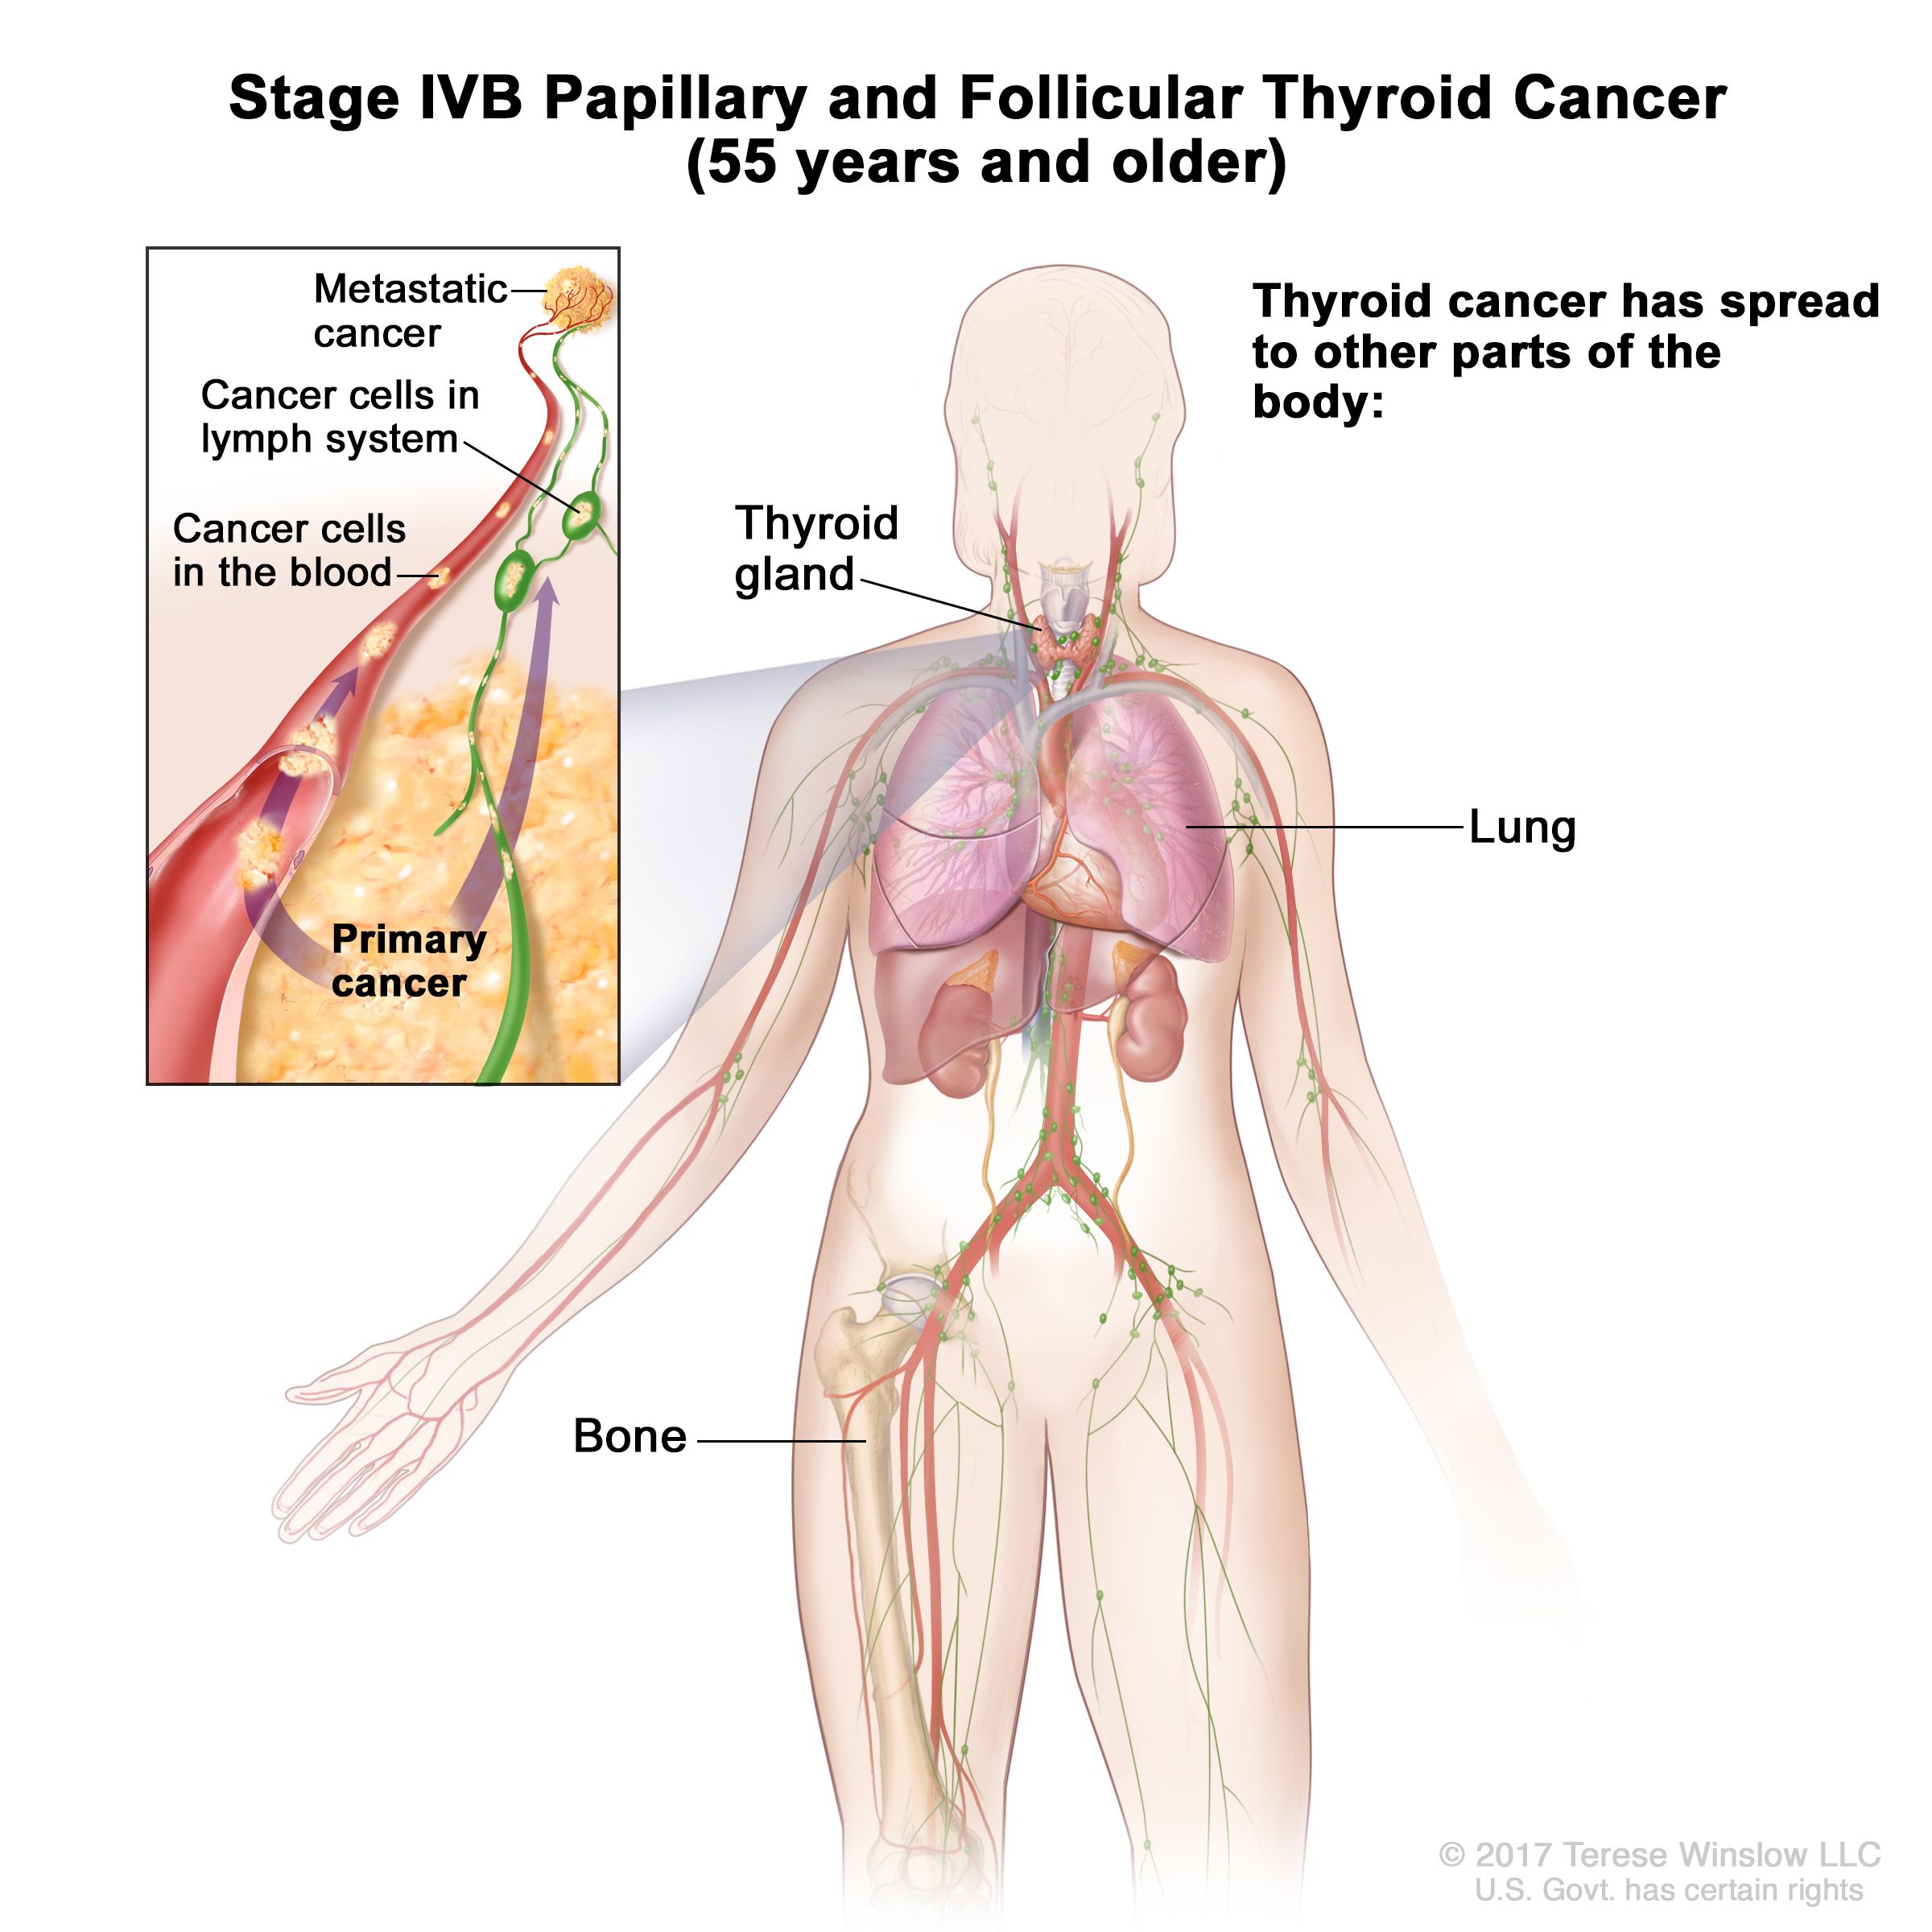 Where Does Papillary Thyroid Cancer Spread To